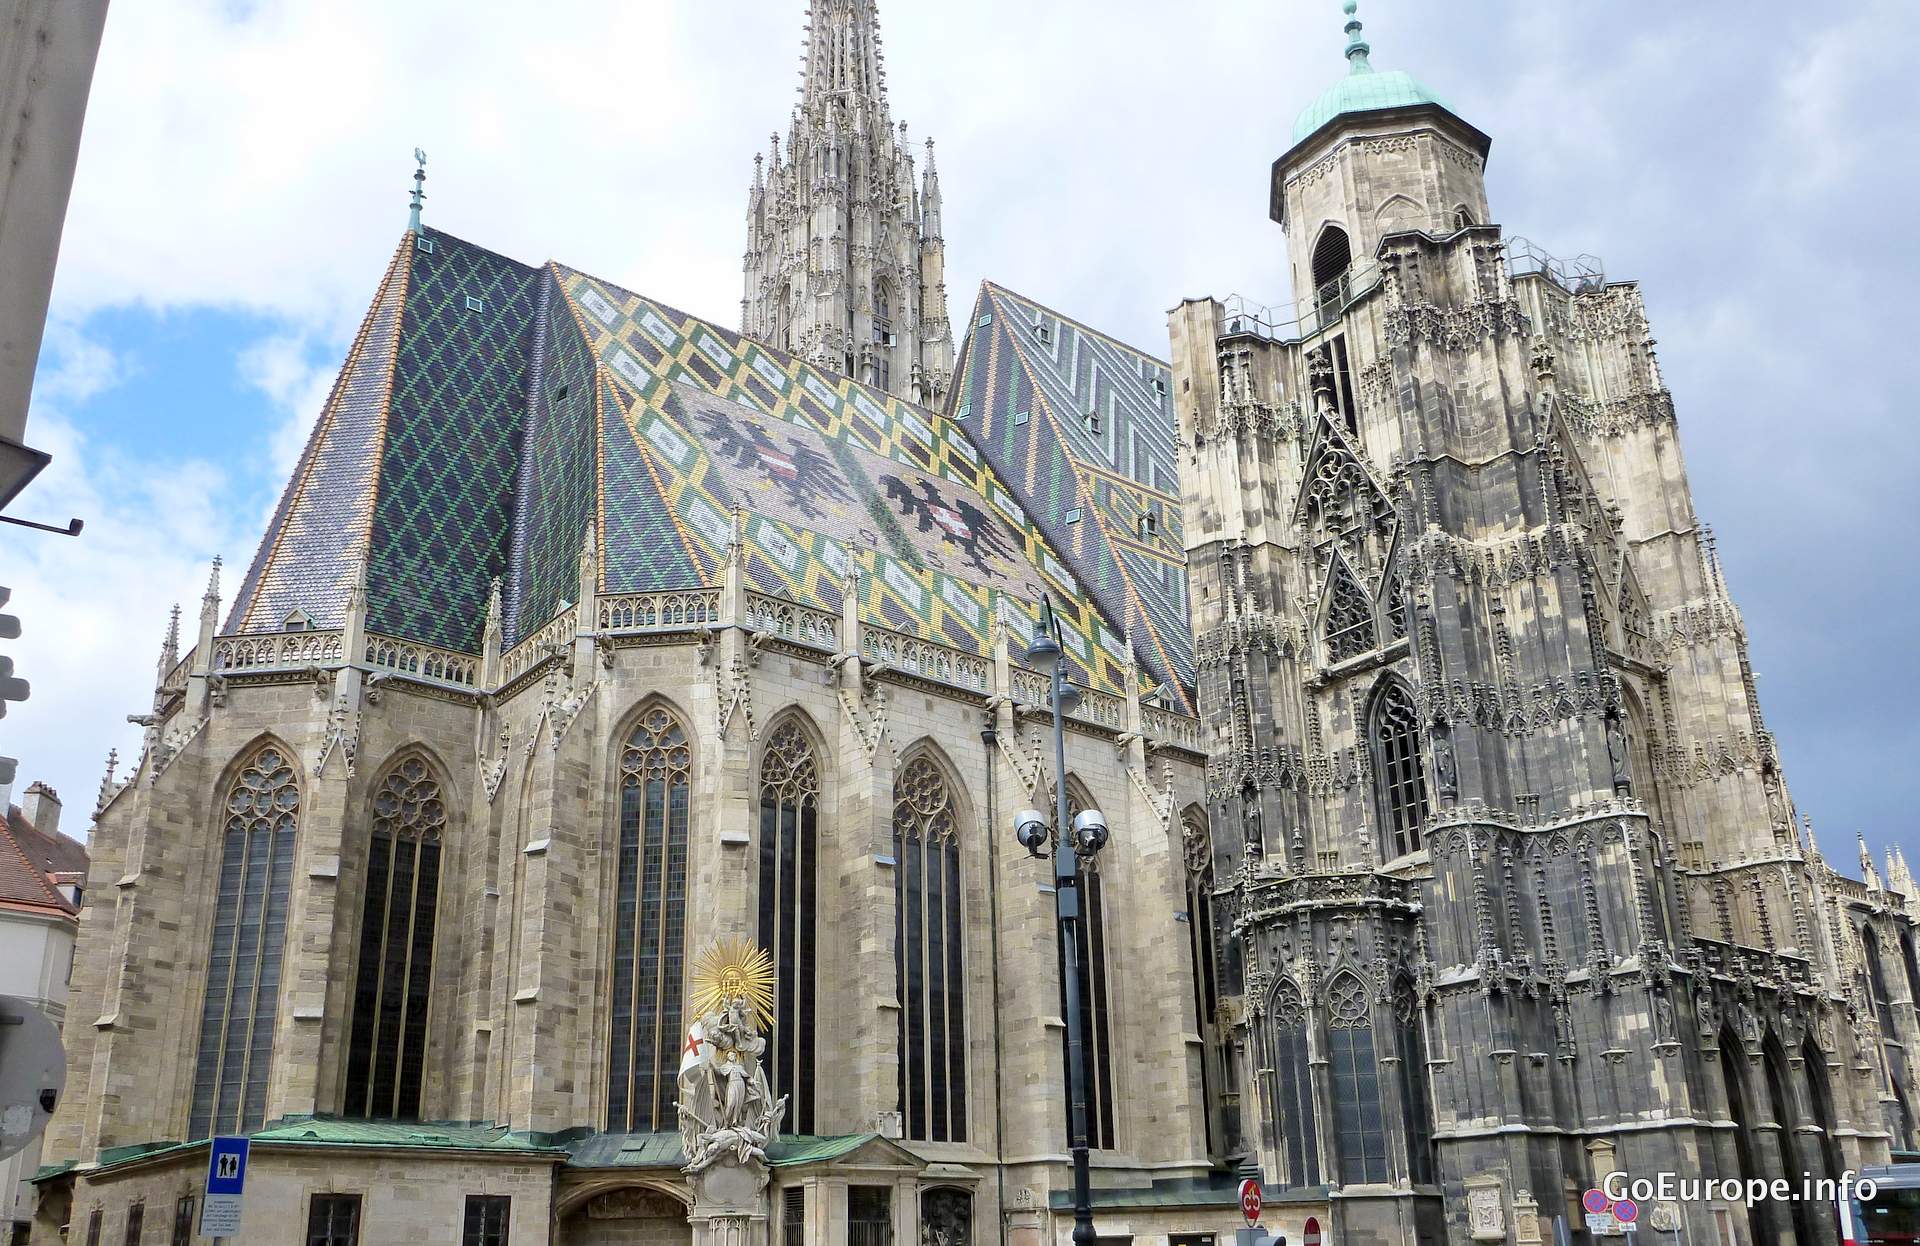 St Stephens Cathedral of Vienna.